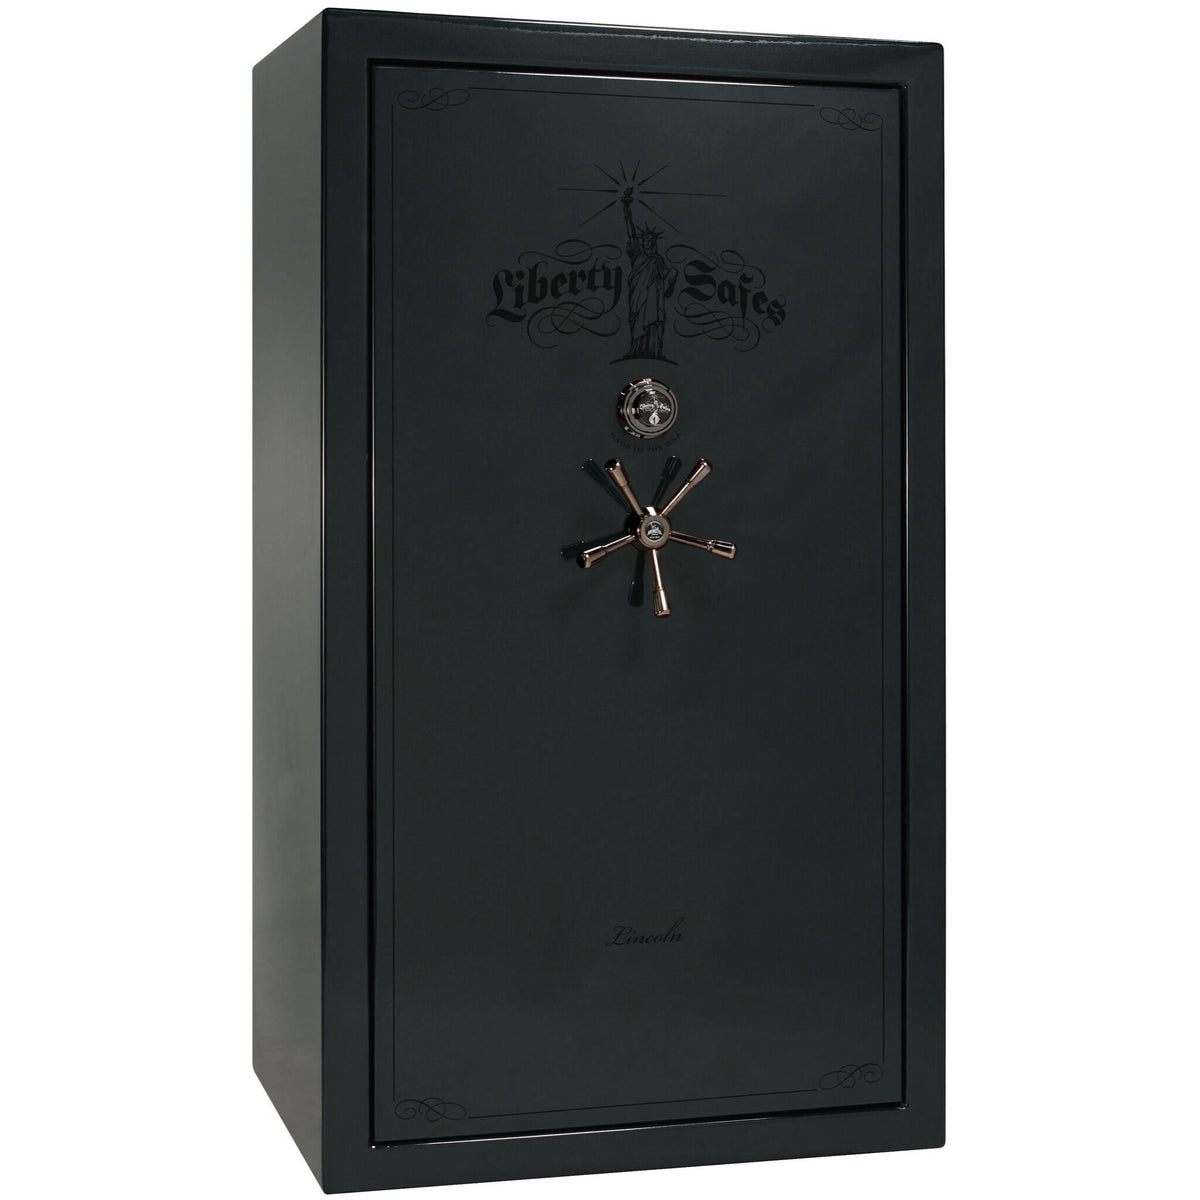 Liberty Lincoln 50 Safe in Green Gloss with Black Chrome Mechanical Lock.